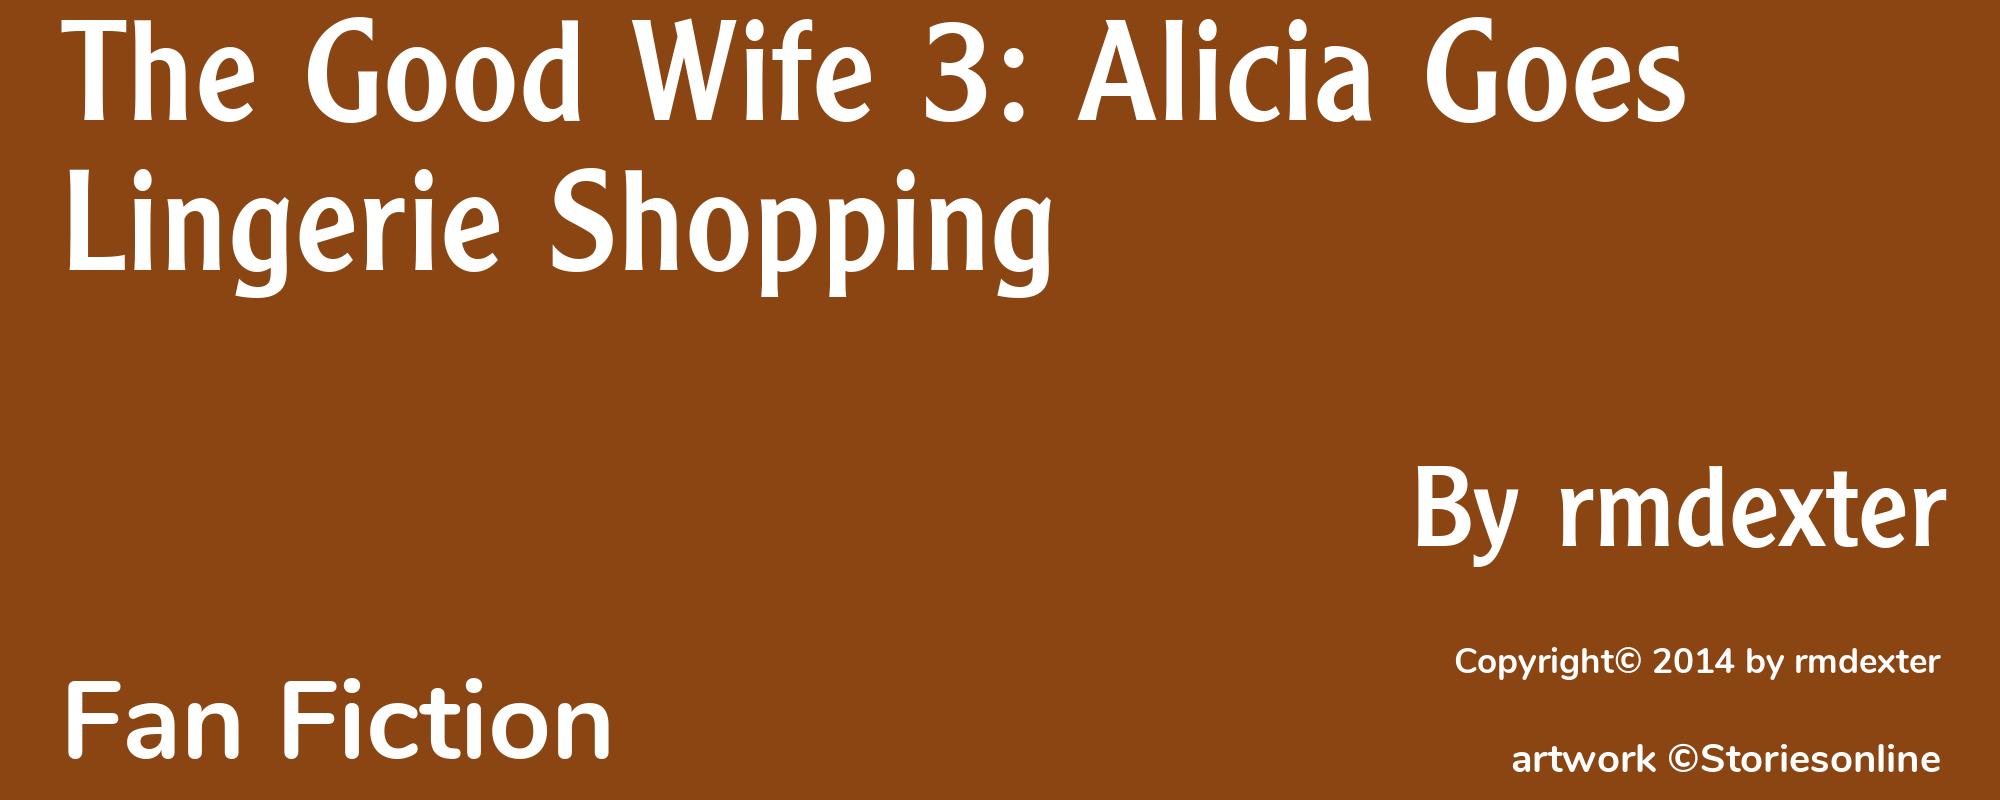 The Good Wife 3: Alicia Goes Lingerie Shopping - Cover